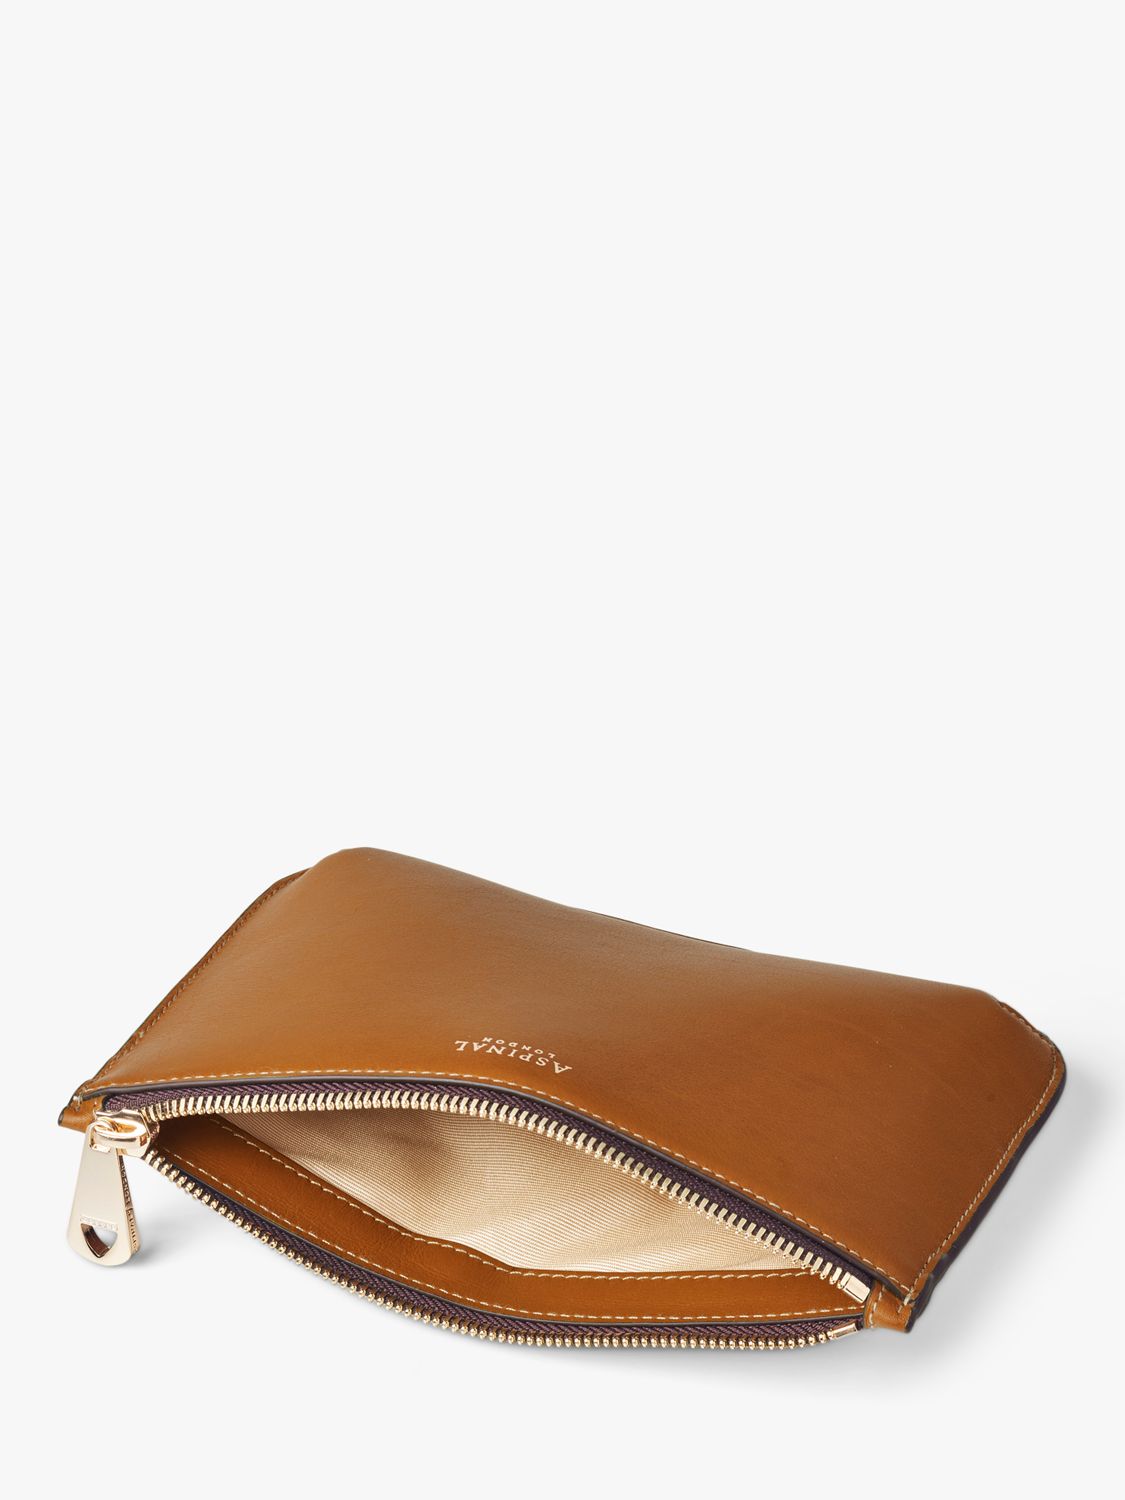 Buy Aspinal of London Medium Ella Smooth Leather Pouch Online at johnlewis.com